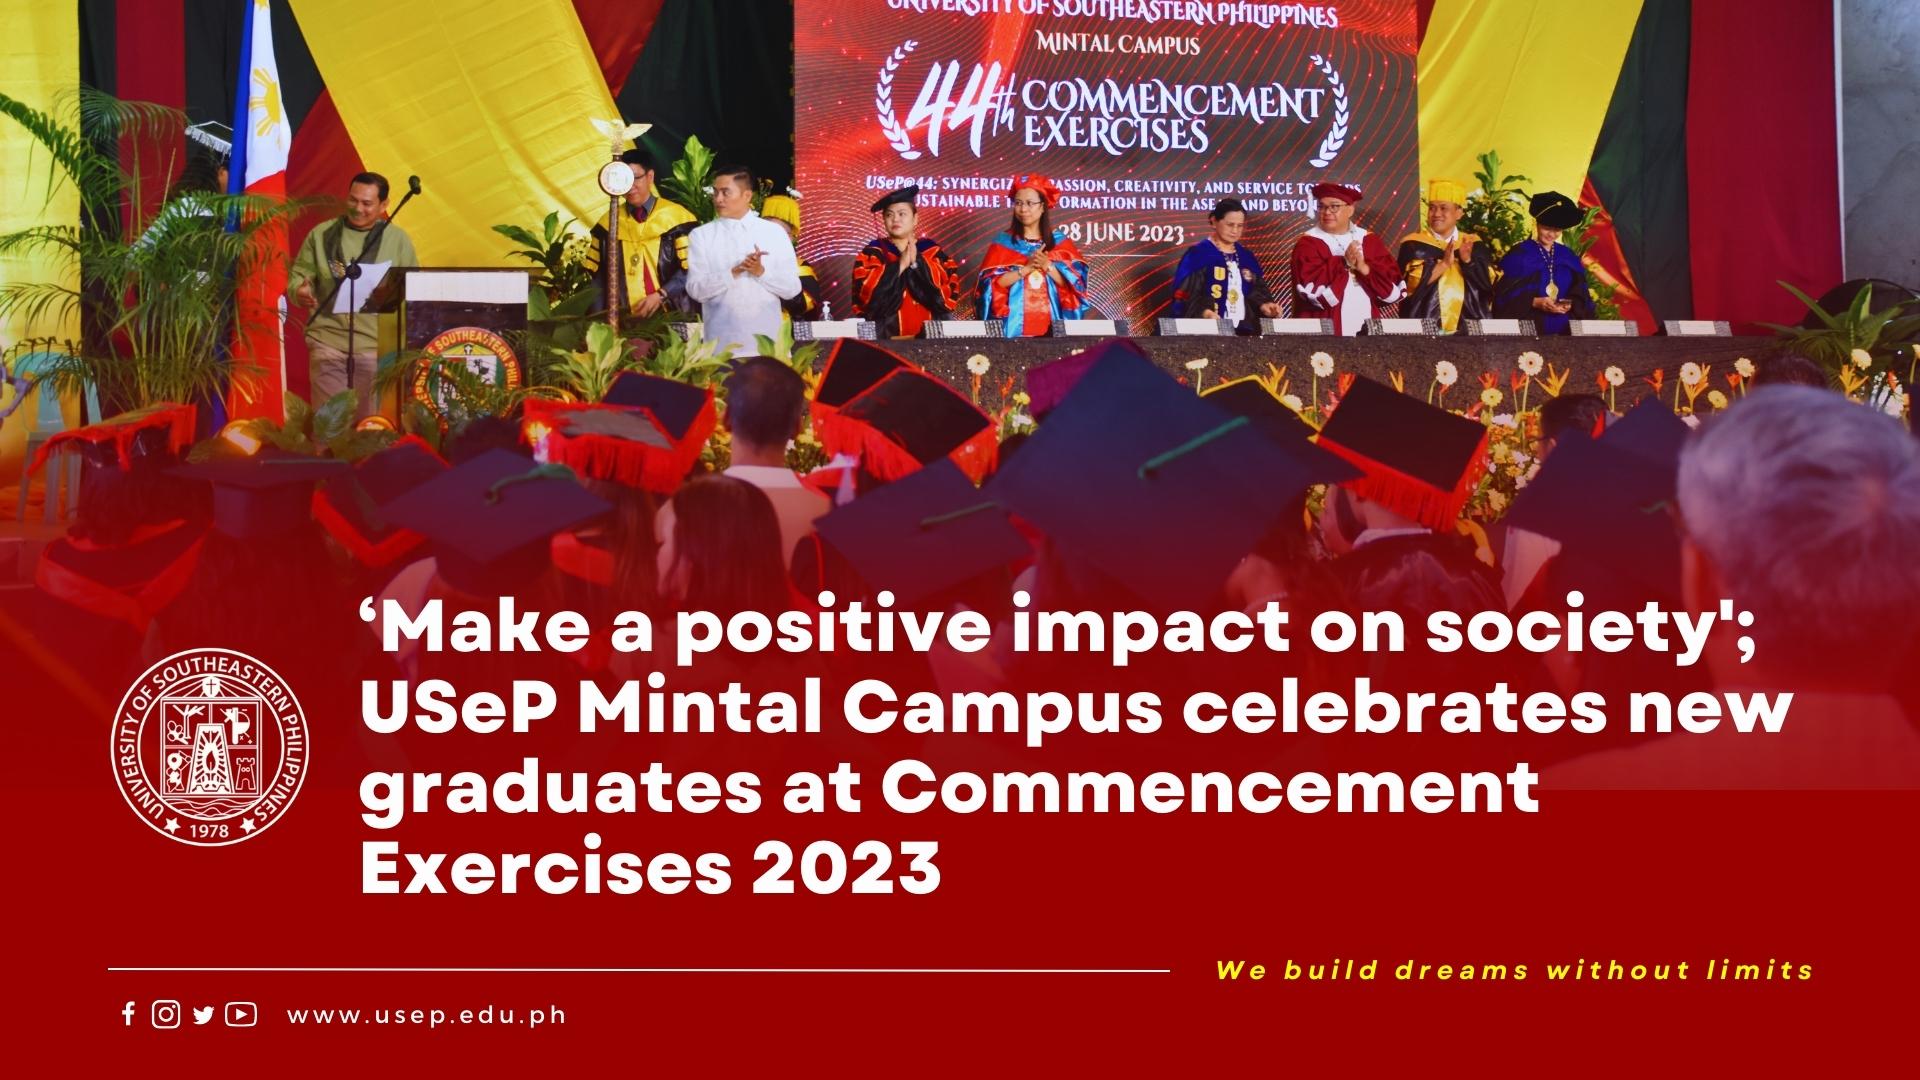 ‘Make a positive impact on society’; USeP Mintal Campus celebrates new graduates at Commencement Exercises 2023